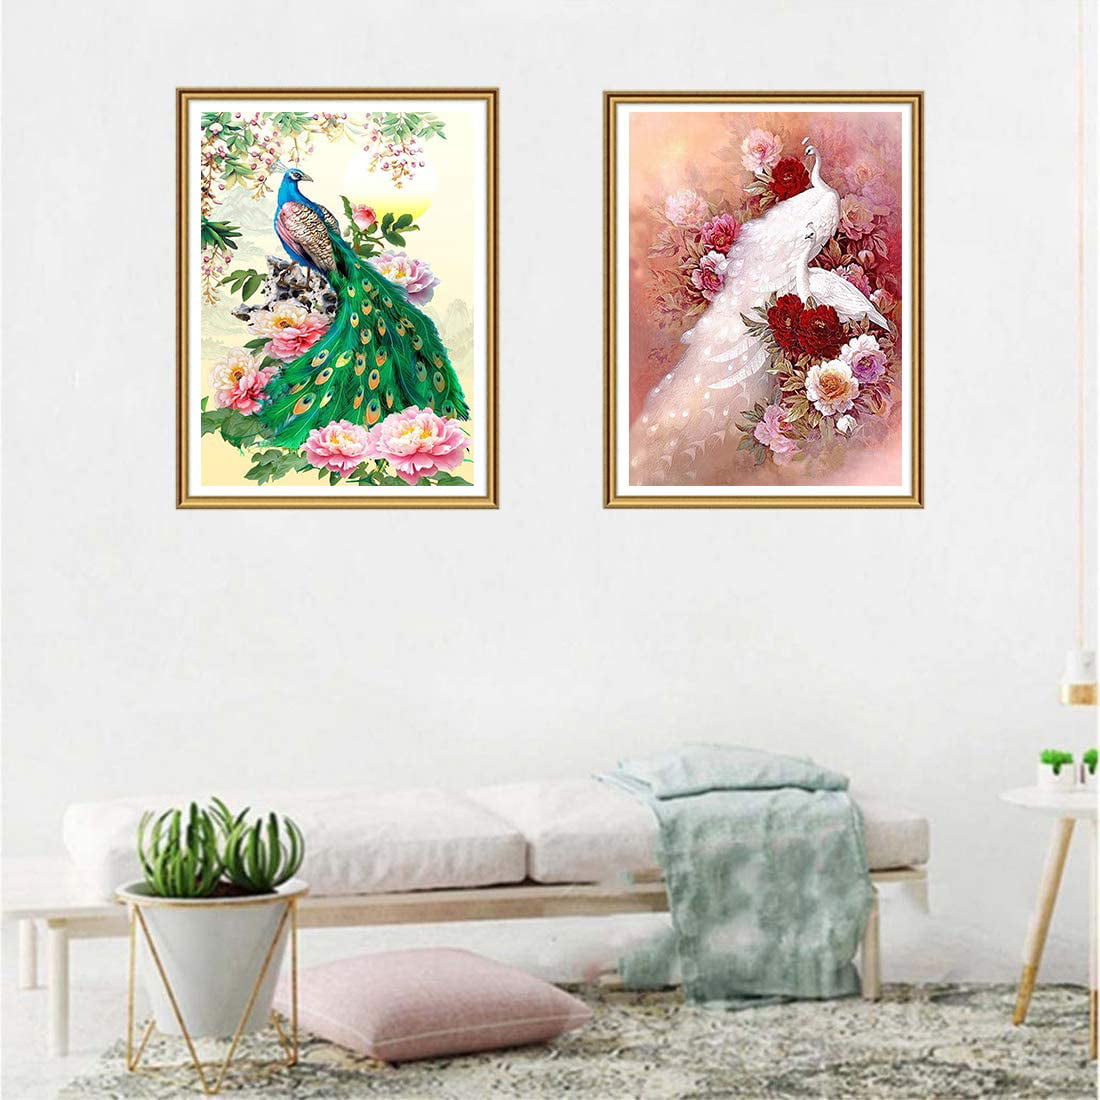 DIY 5D Diamond Painting Bird by Number Kits feilin Full Drill Painting Cross Stitch Crystal Rhinestone Embroidery Mosaic Picture Artwork Home Wall Decor Gift 11.8x15.7inch